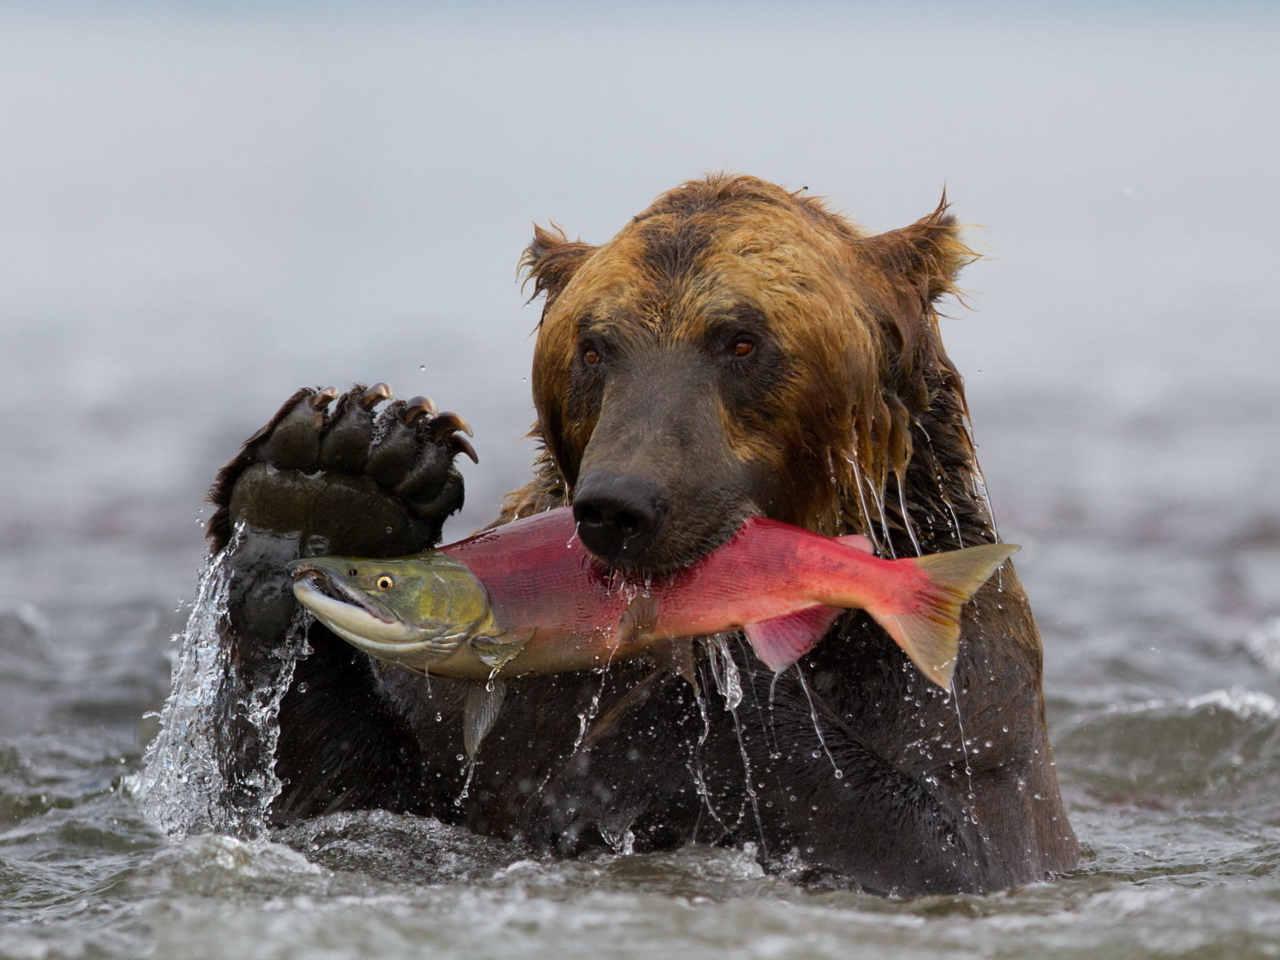 Grizzly Bear Catching Fish wallpaper 1280x960